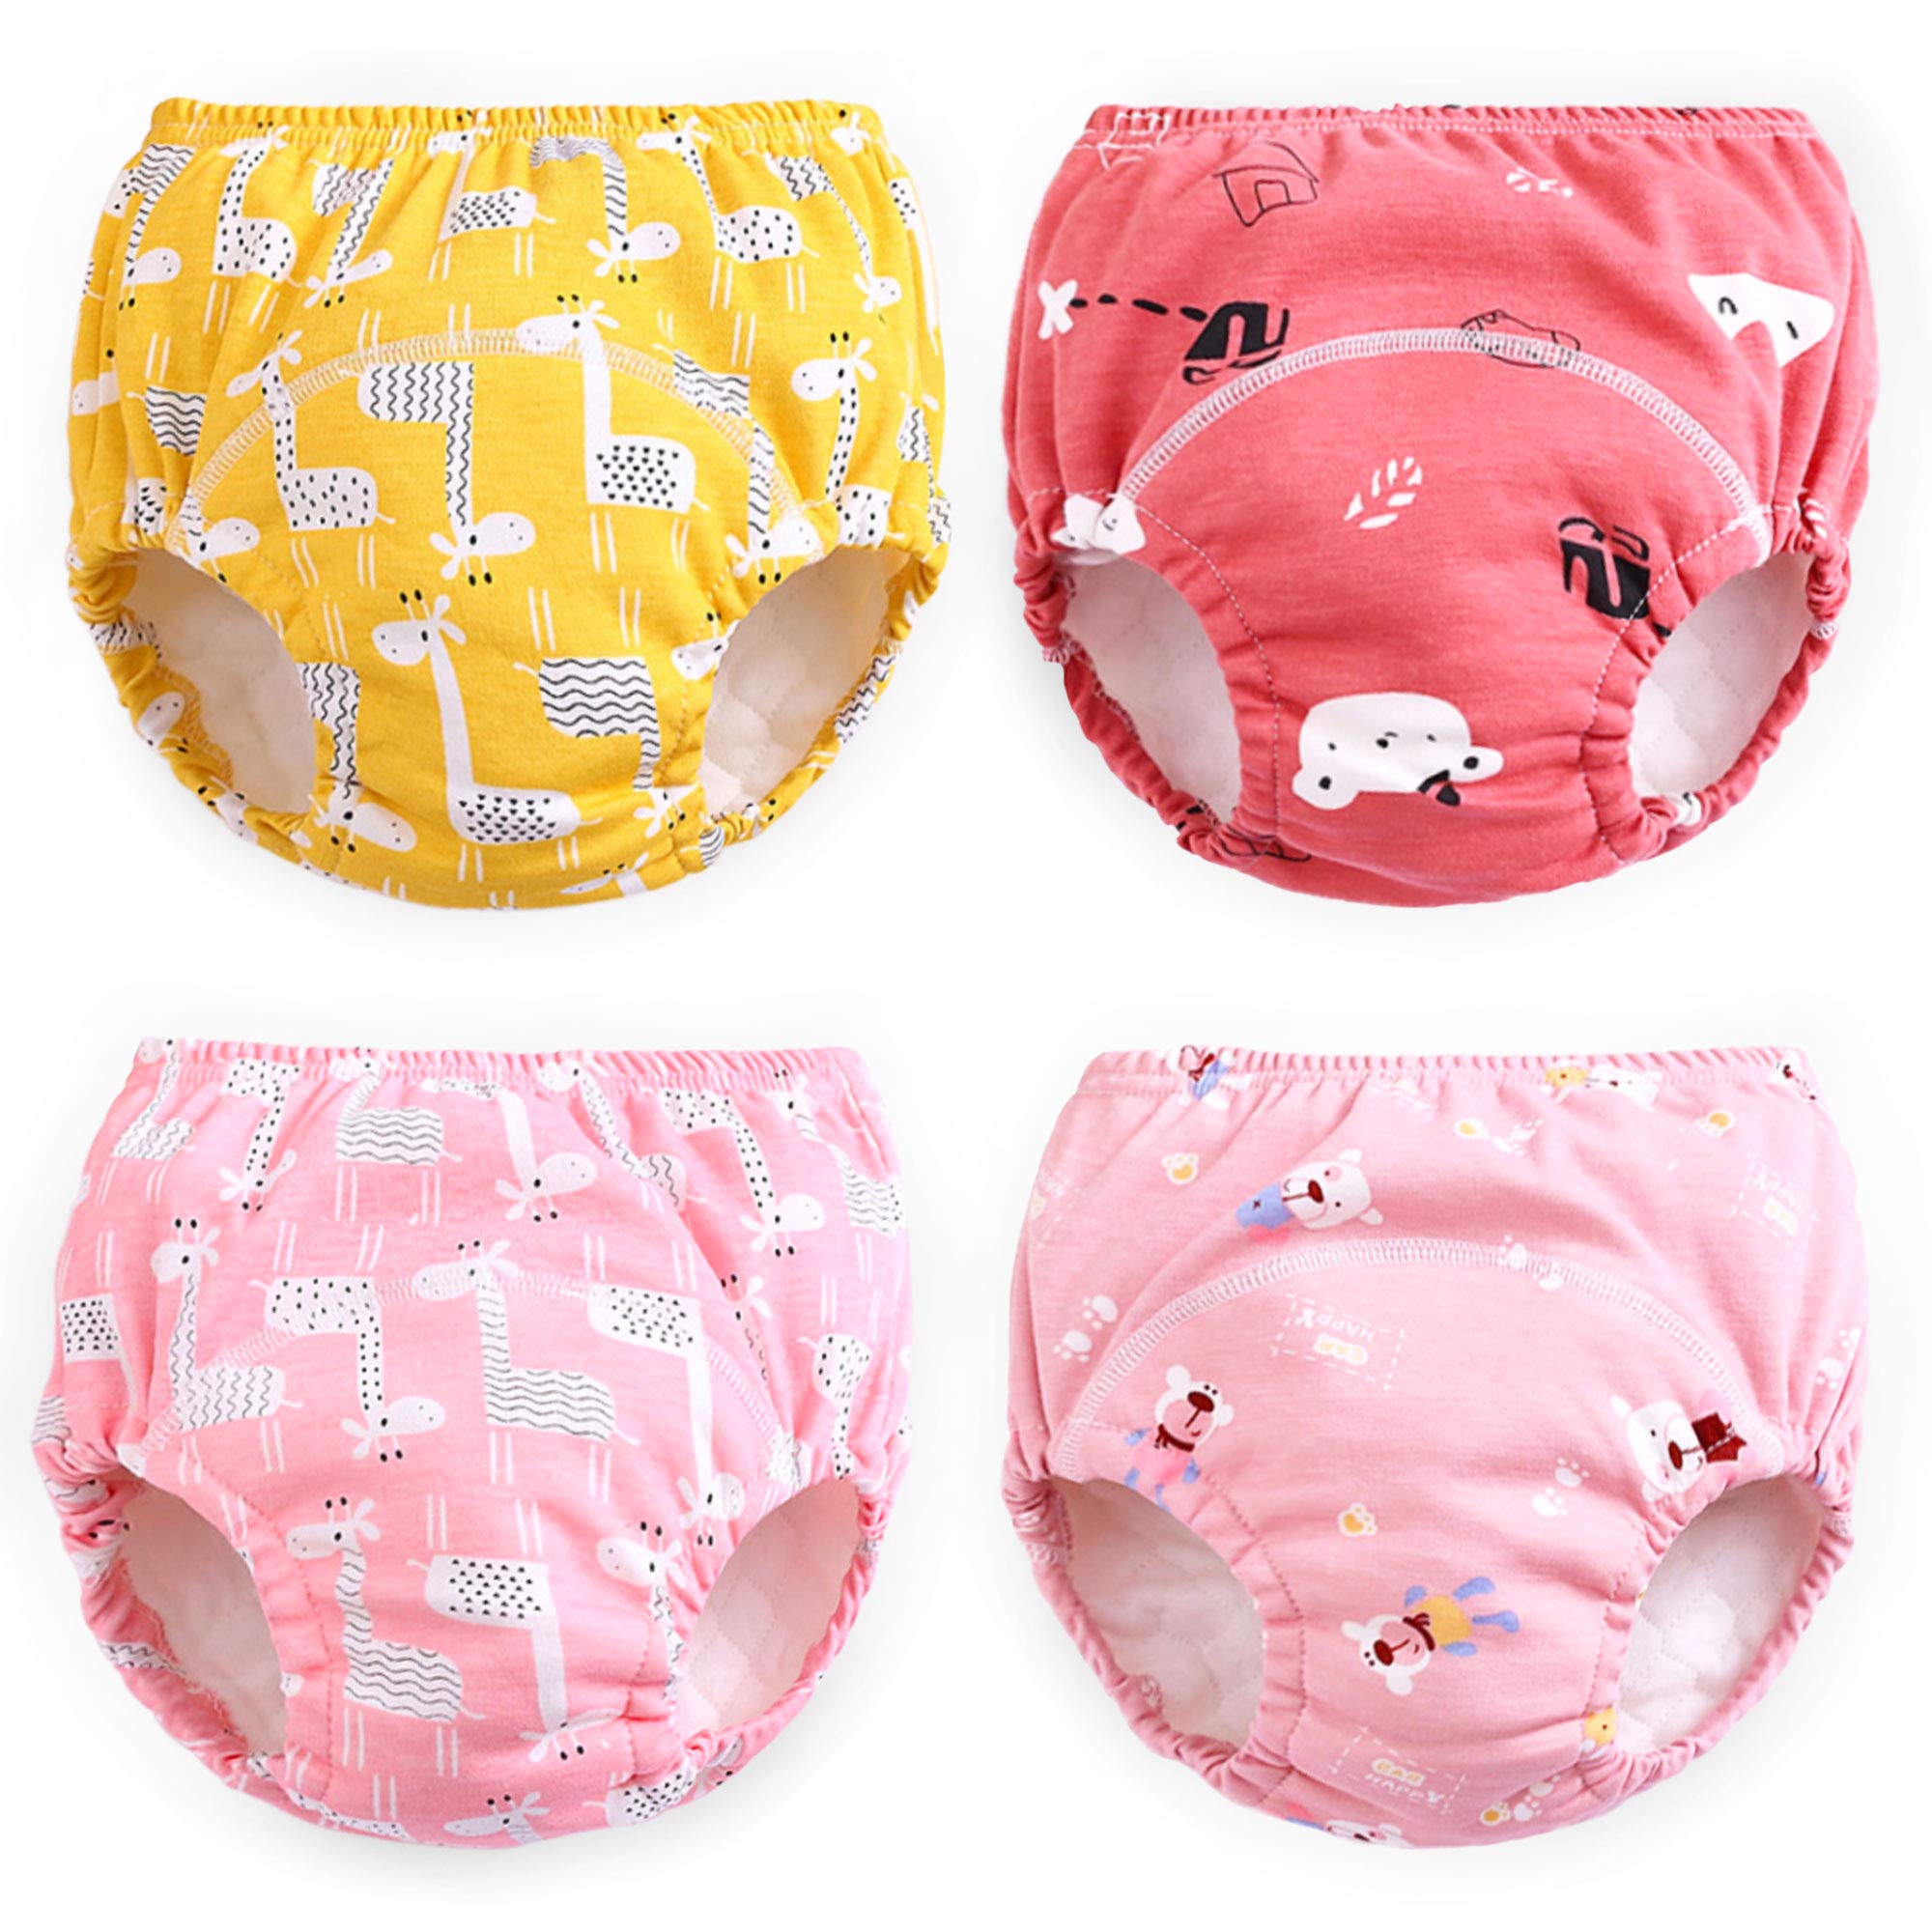 New Cute Prints Baby Cloth Diaper Panties Reusable Toilet Potty Training  Diapers Pants for Newborn Girls Boys 1t 2t 3t 4t - AliExpress